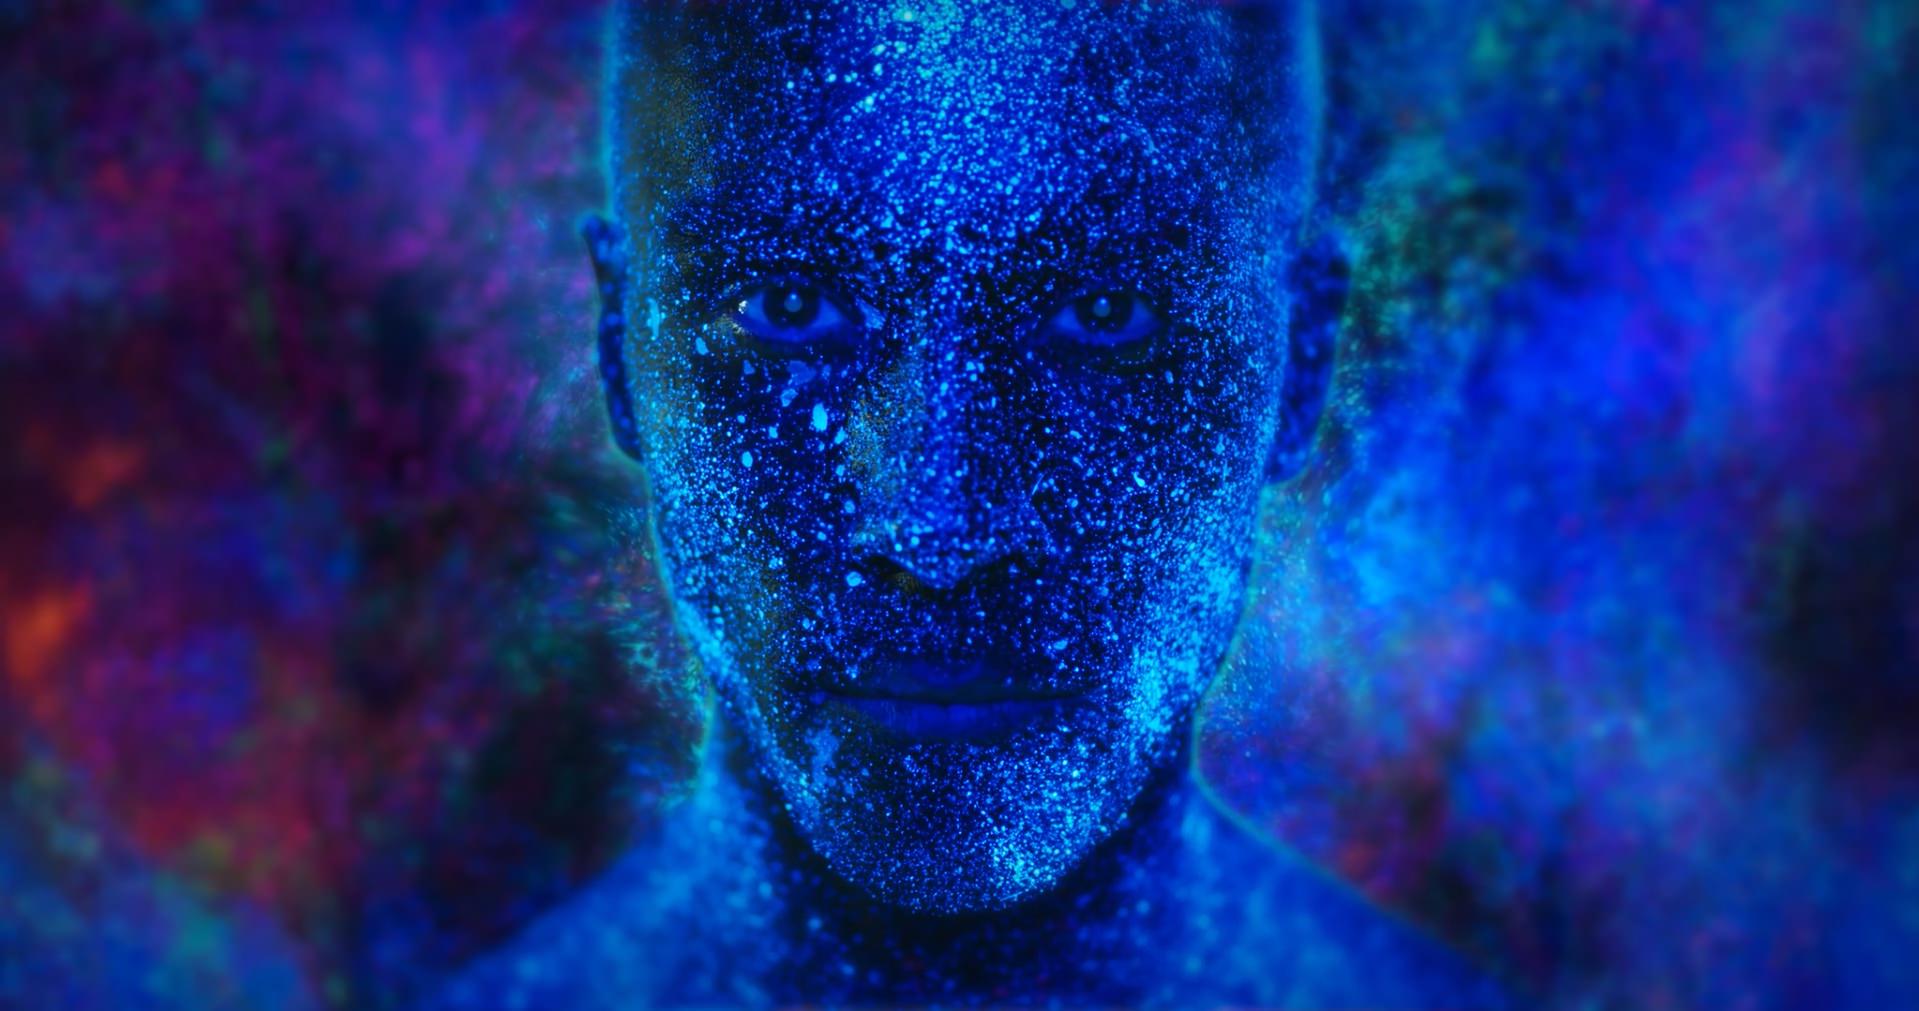 This image shows the face of man covered in blue and sparkly bodypaint surrounded by blue and purple glitter background